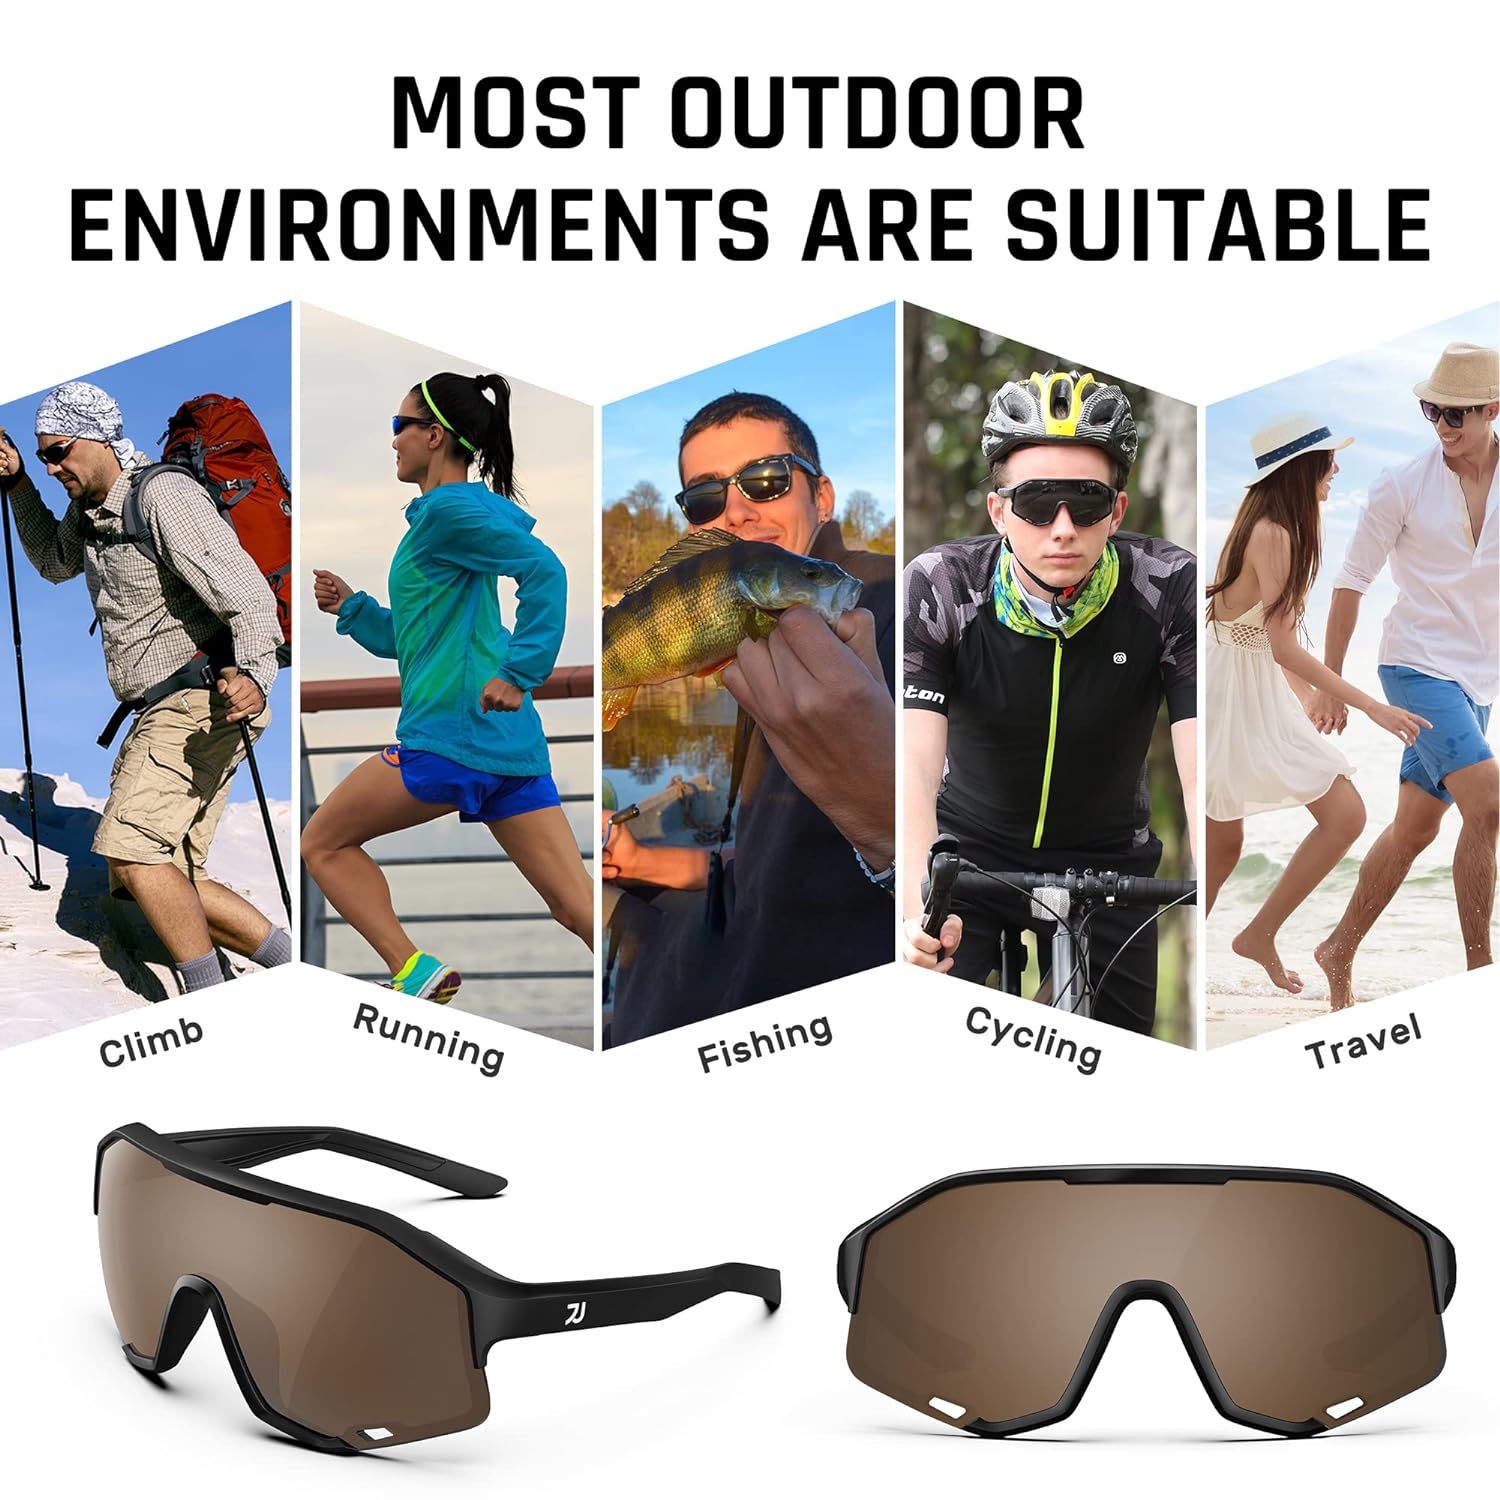 RIVBAO Polarized Cycling Sunglasses for Men and Women Uv400 Protection,pit vipers Sports Glasses for Running,Biking,Fishing,Baseball,Golf